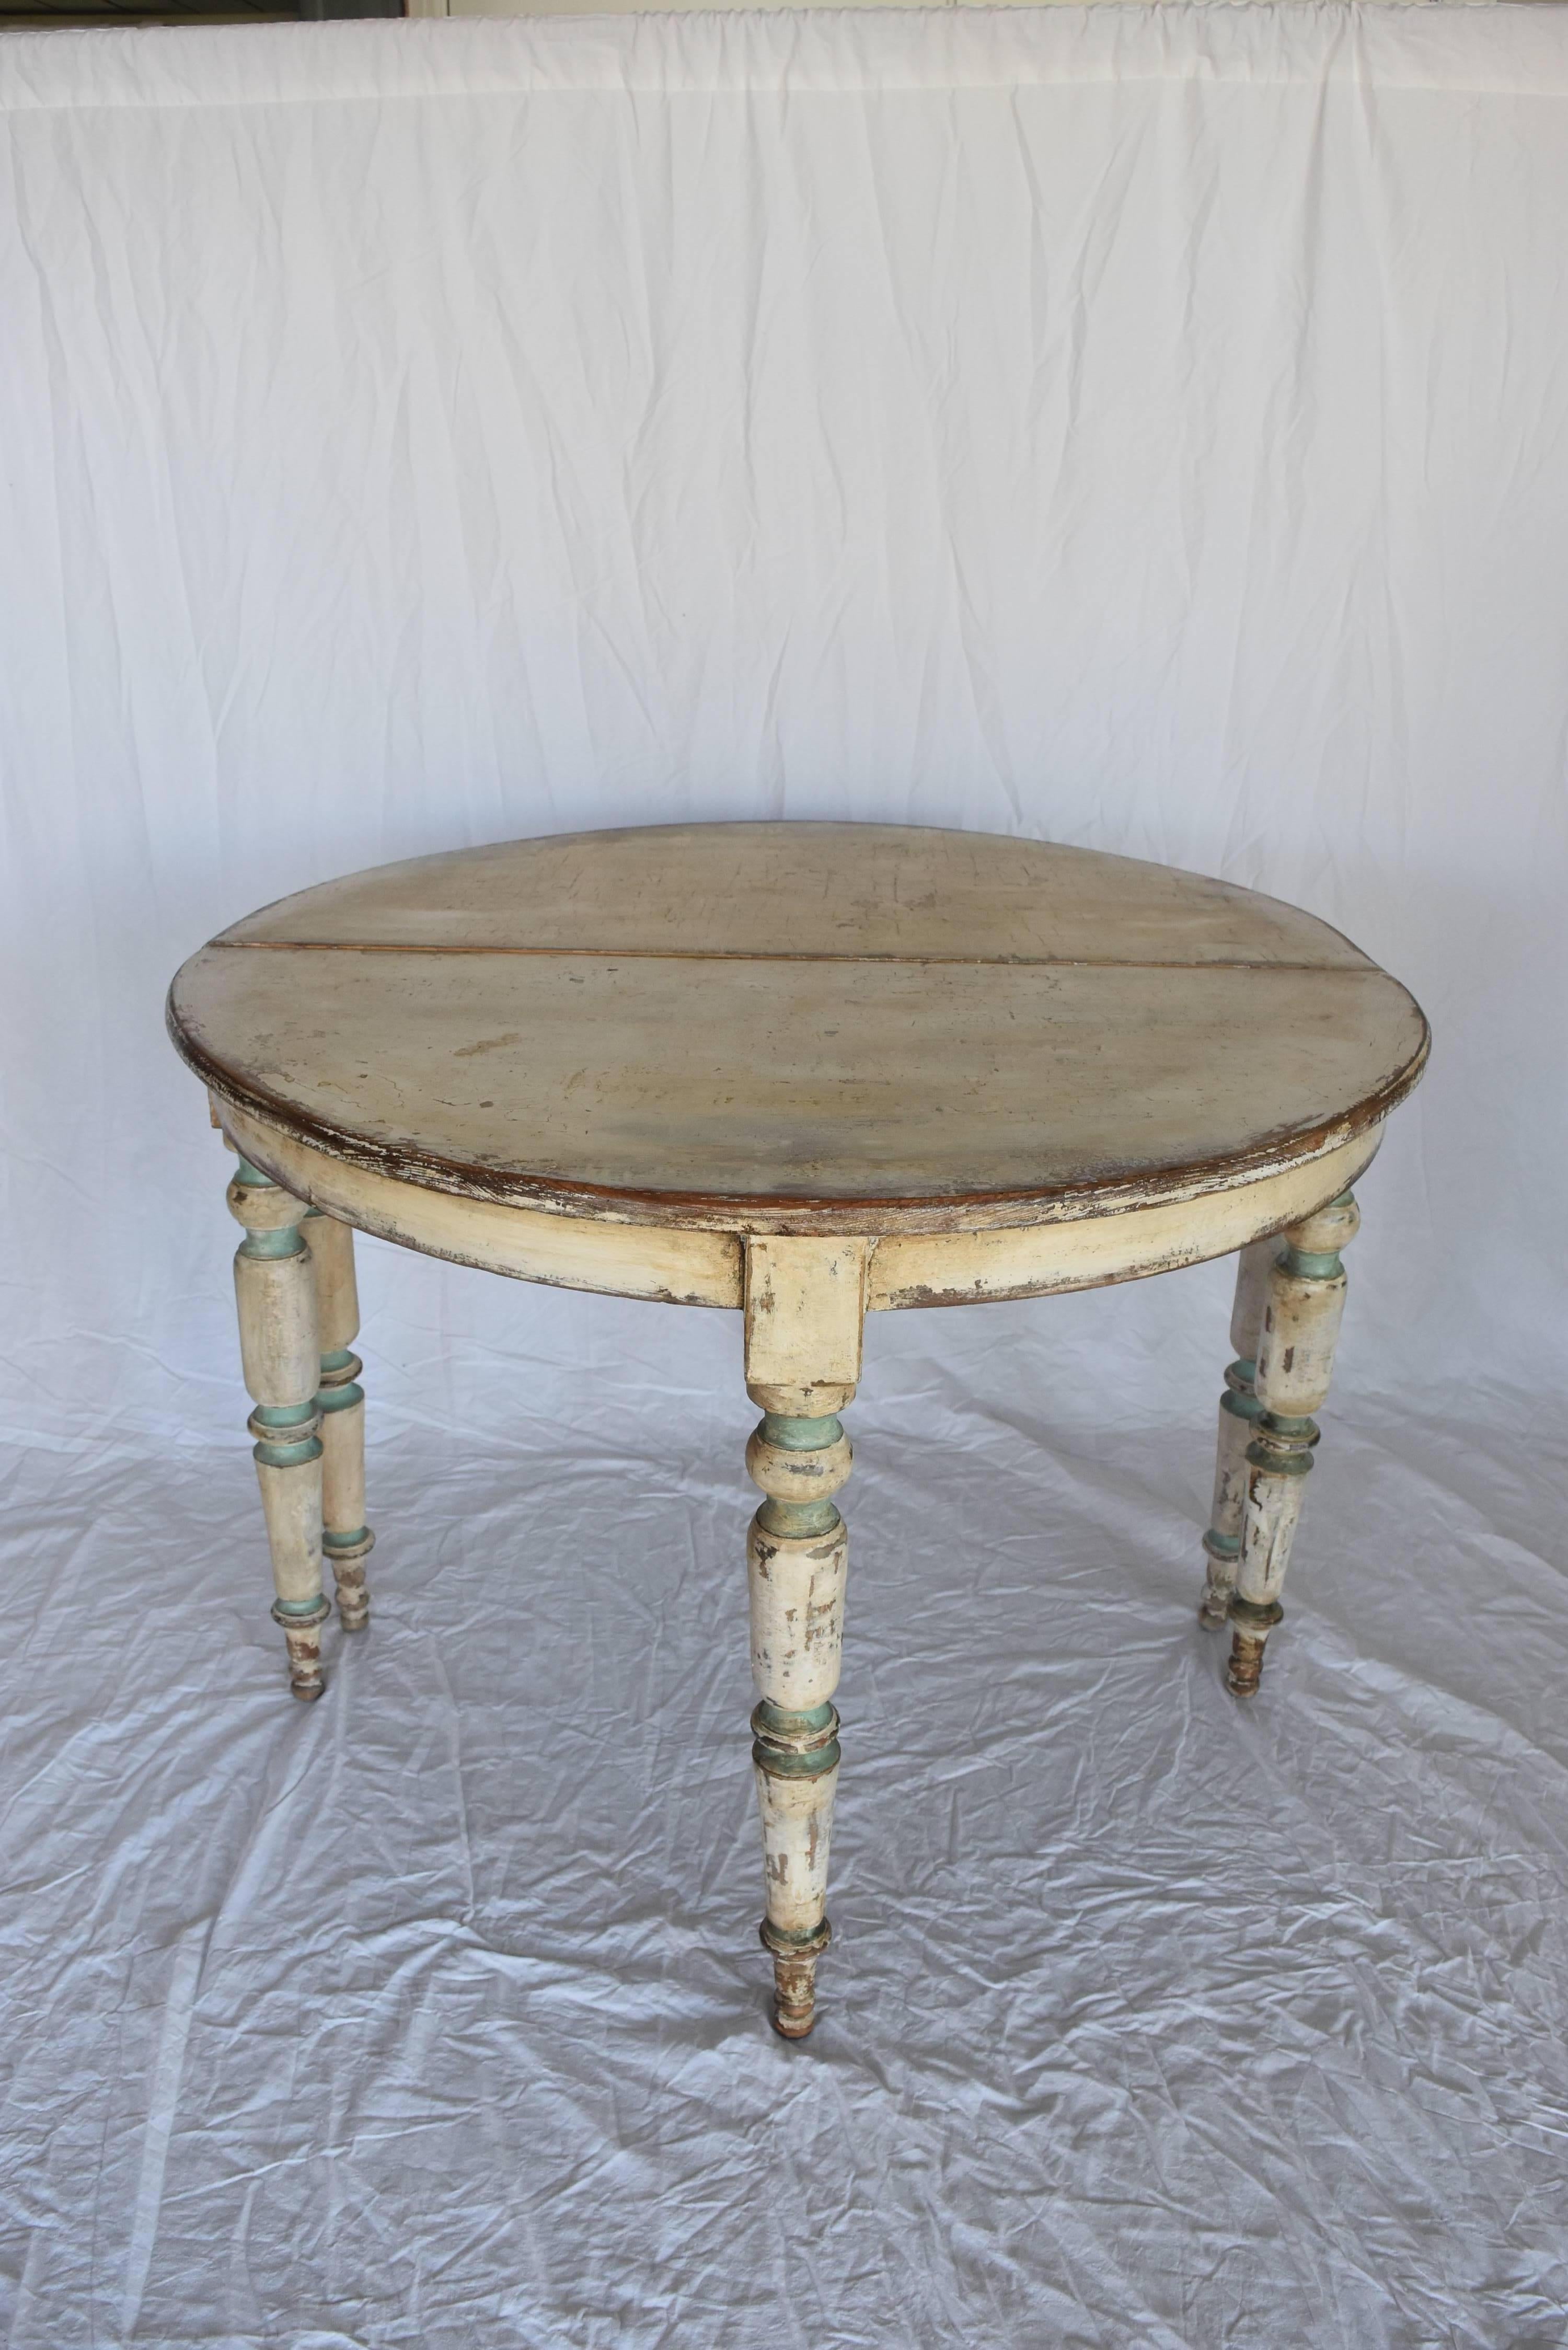 Spanish 1900s Demilune Tables With Later Creamy White Paint And Blue Accents 1